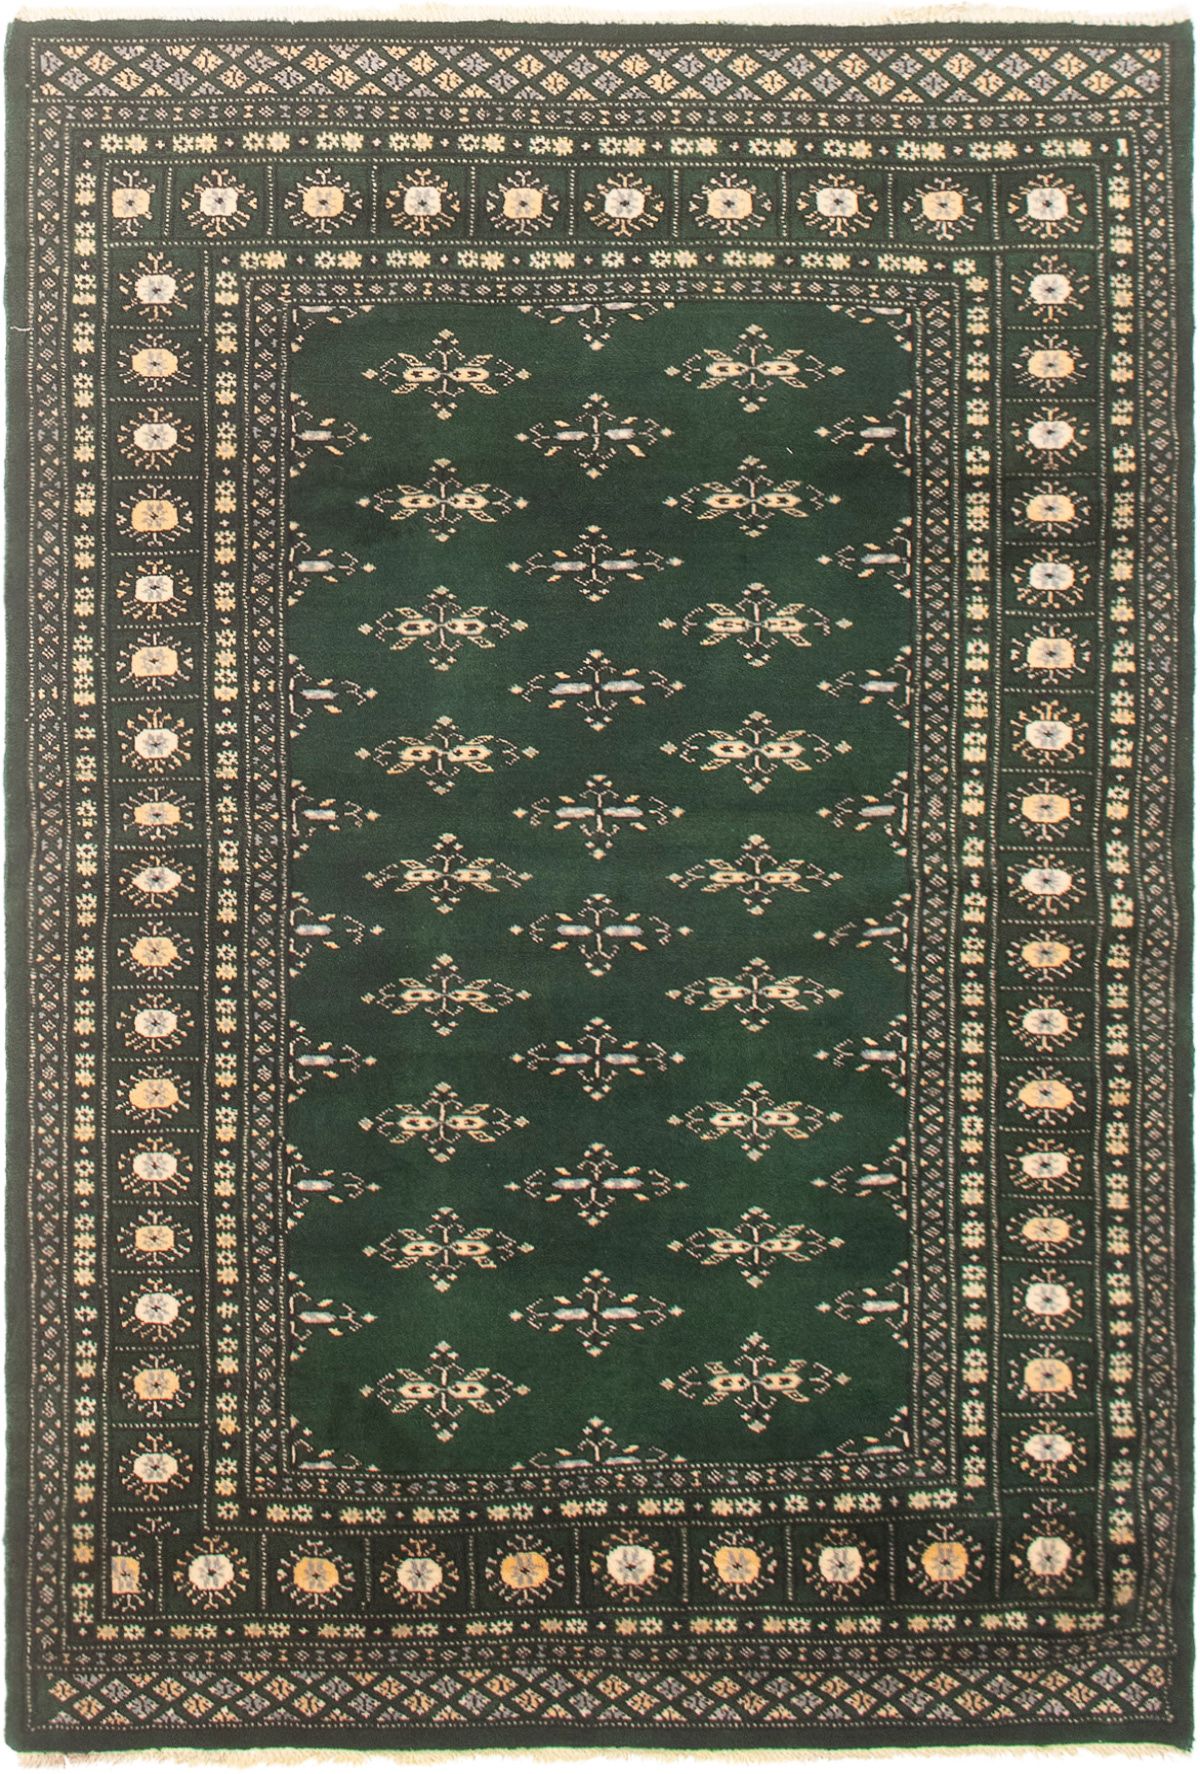 Hand-knotted Finest Peshawar Bokhara Green Wool Rug 4'0" x 6'0" Size: 4'0" x 6'0"  